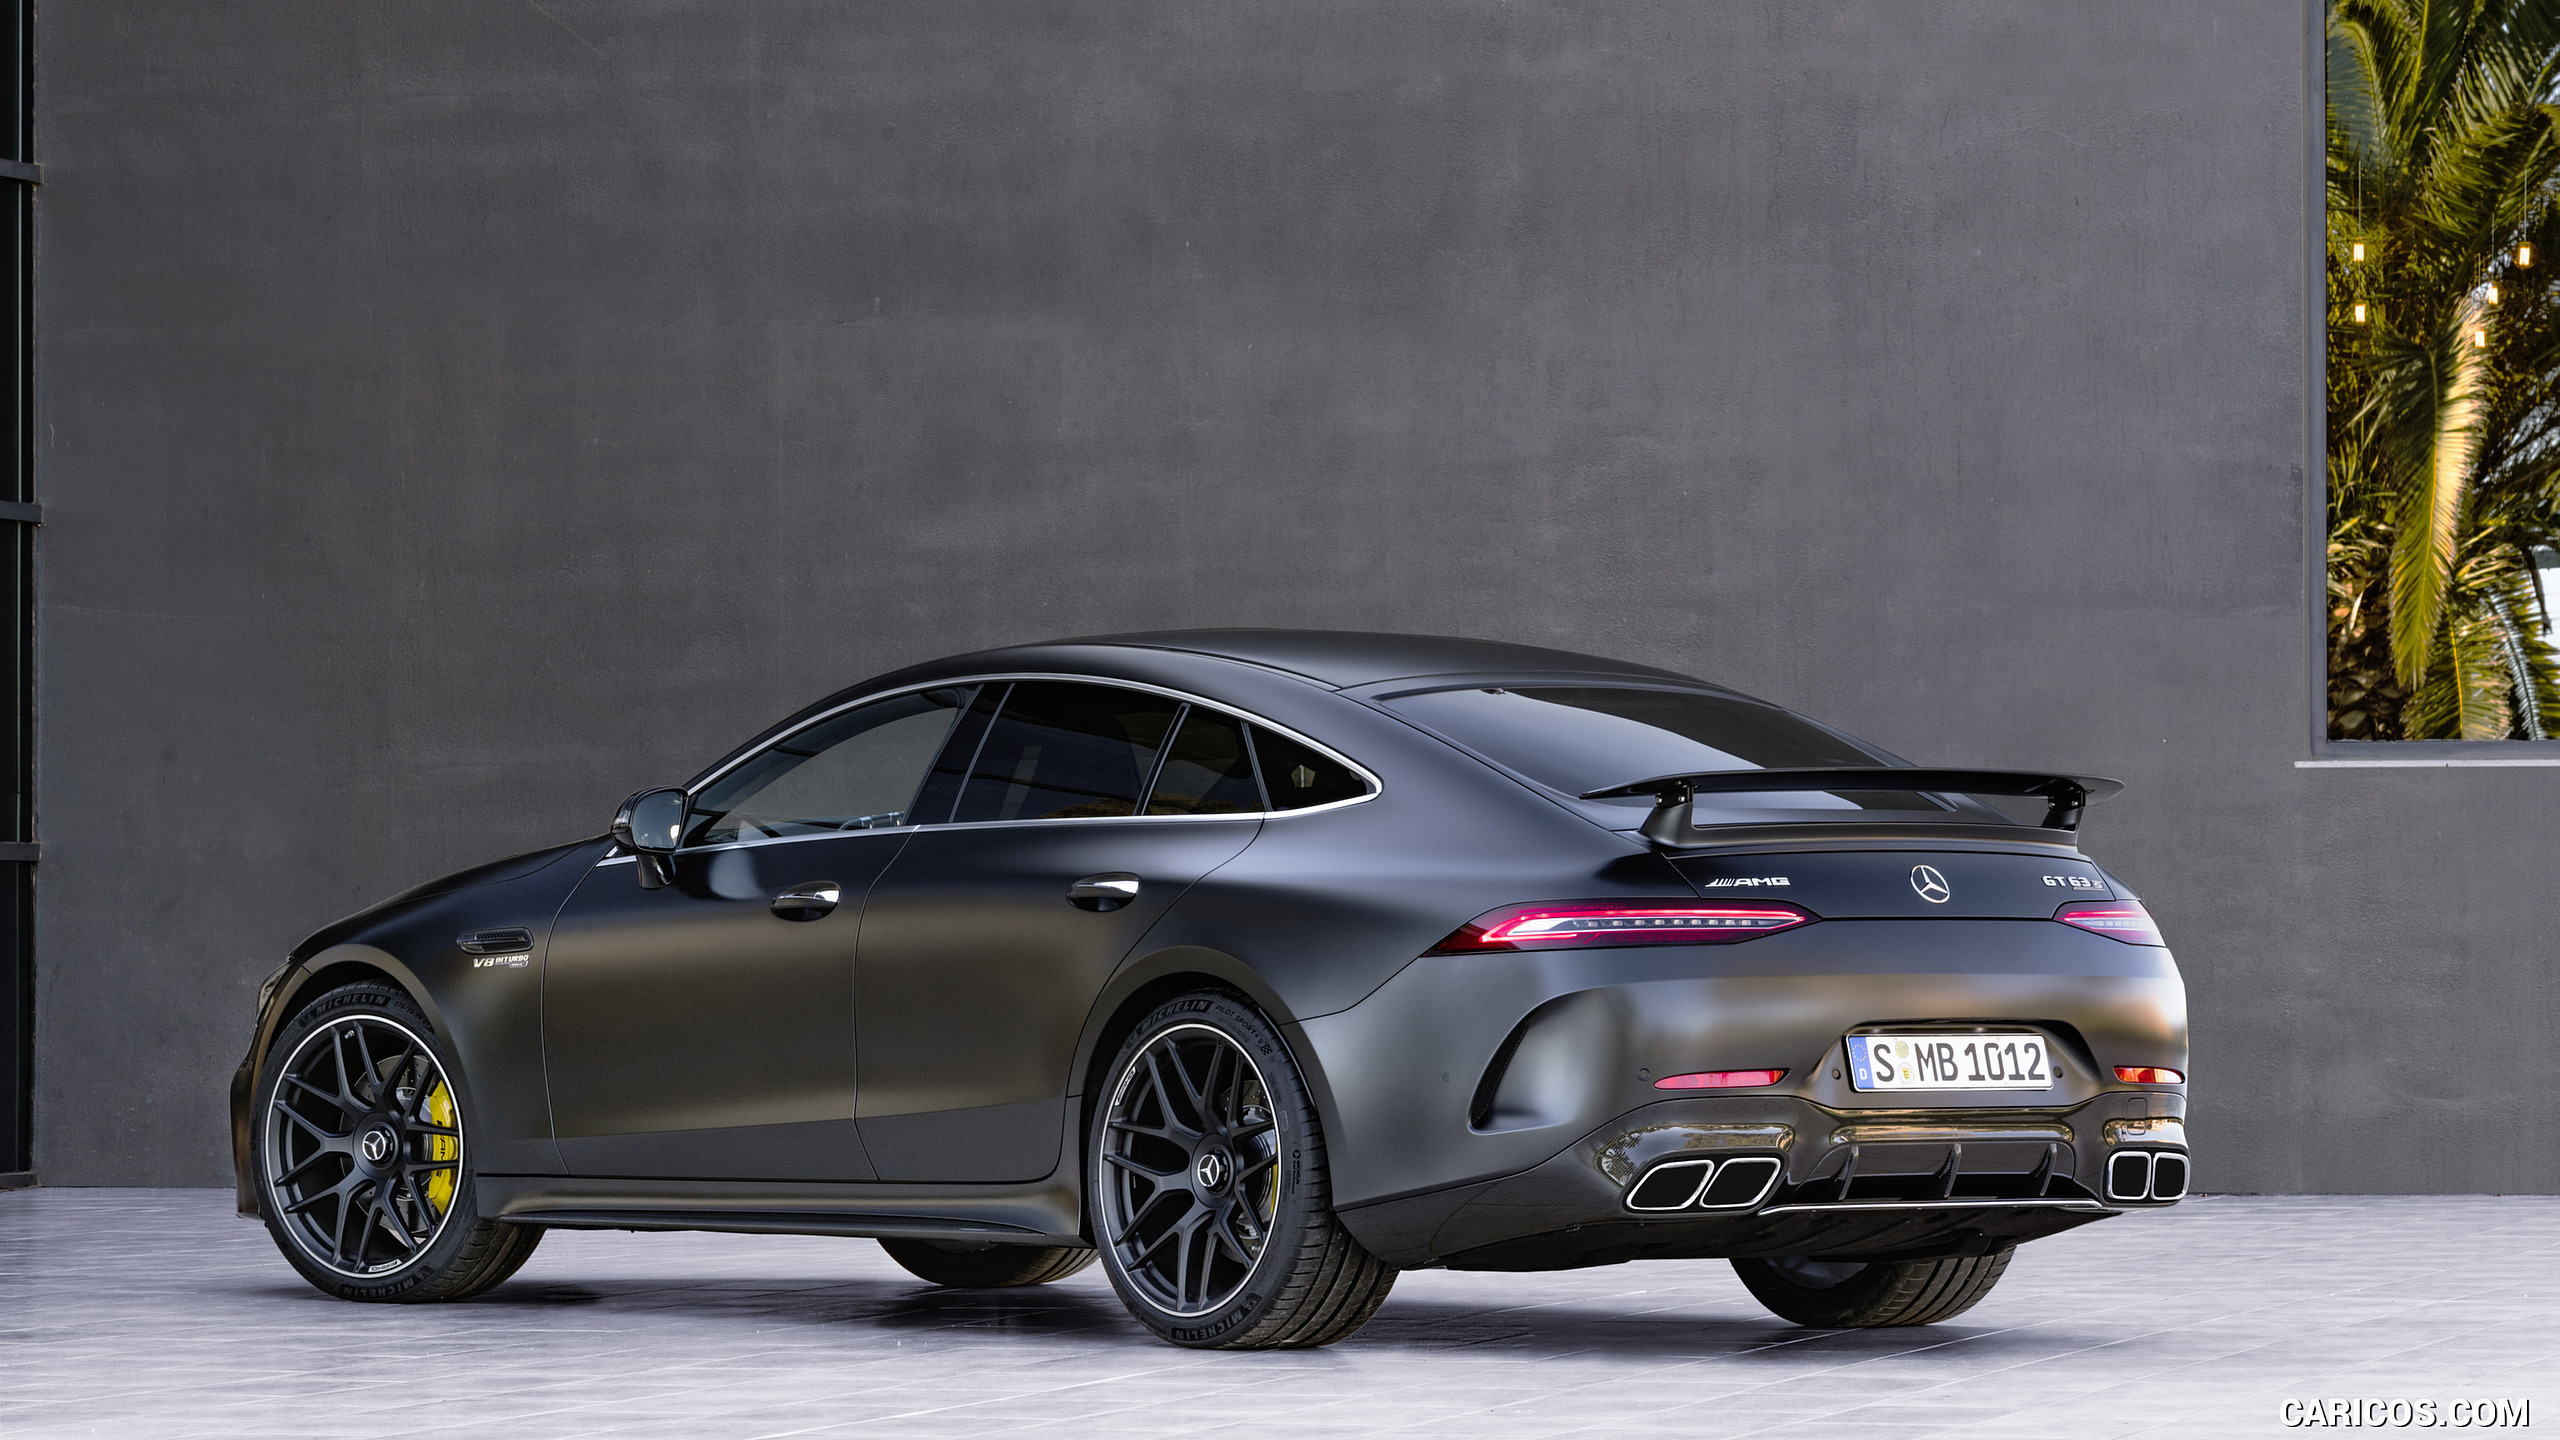 2019 Mercedes-AMG GT 63 S 4MATIC+ 4-Door Coupe (Color: Graphite Grey Magno) - Rear Three-Quarter, #16 of 427